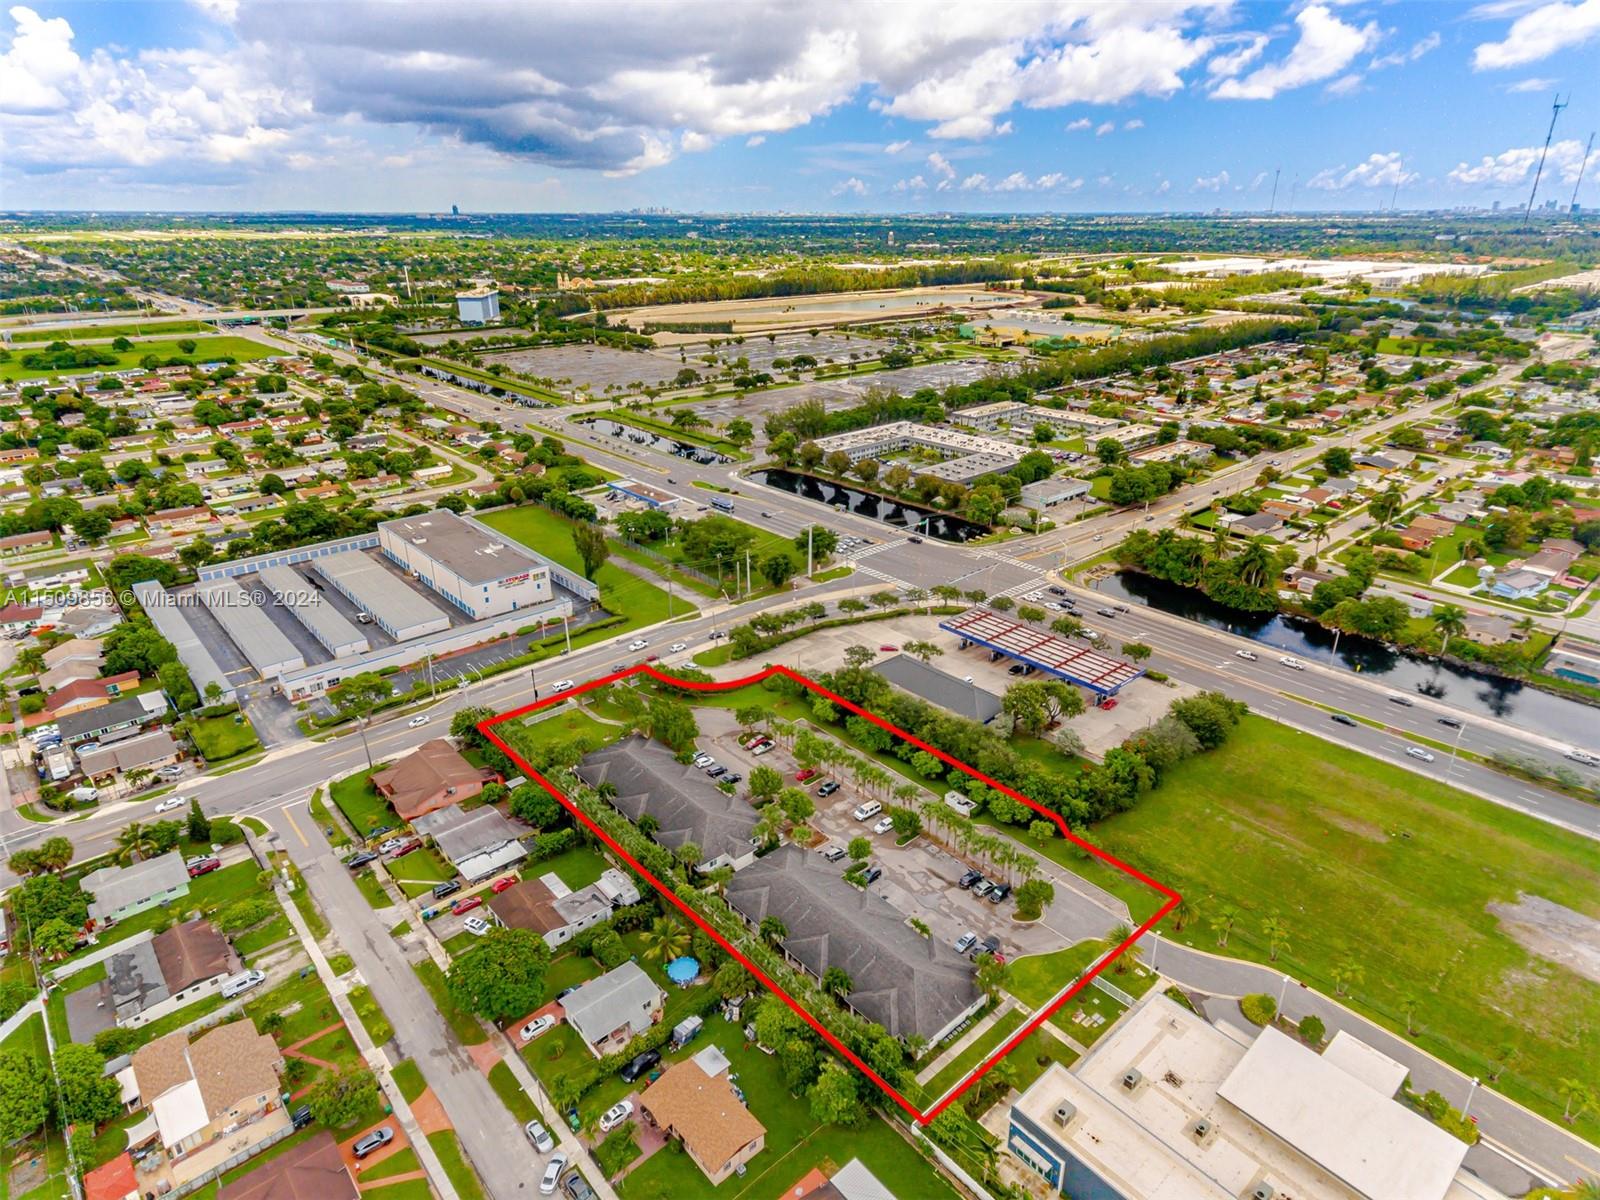 20690 NW 27th Avenue, Miami Gardens, Florida 33056, ,Commercialsale,For Sale,20690 NW 27th Avenue,A11509856